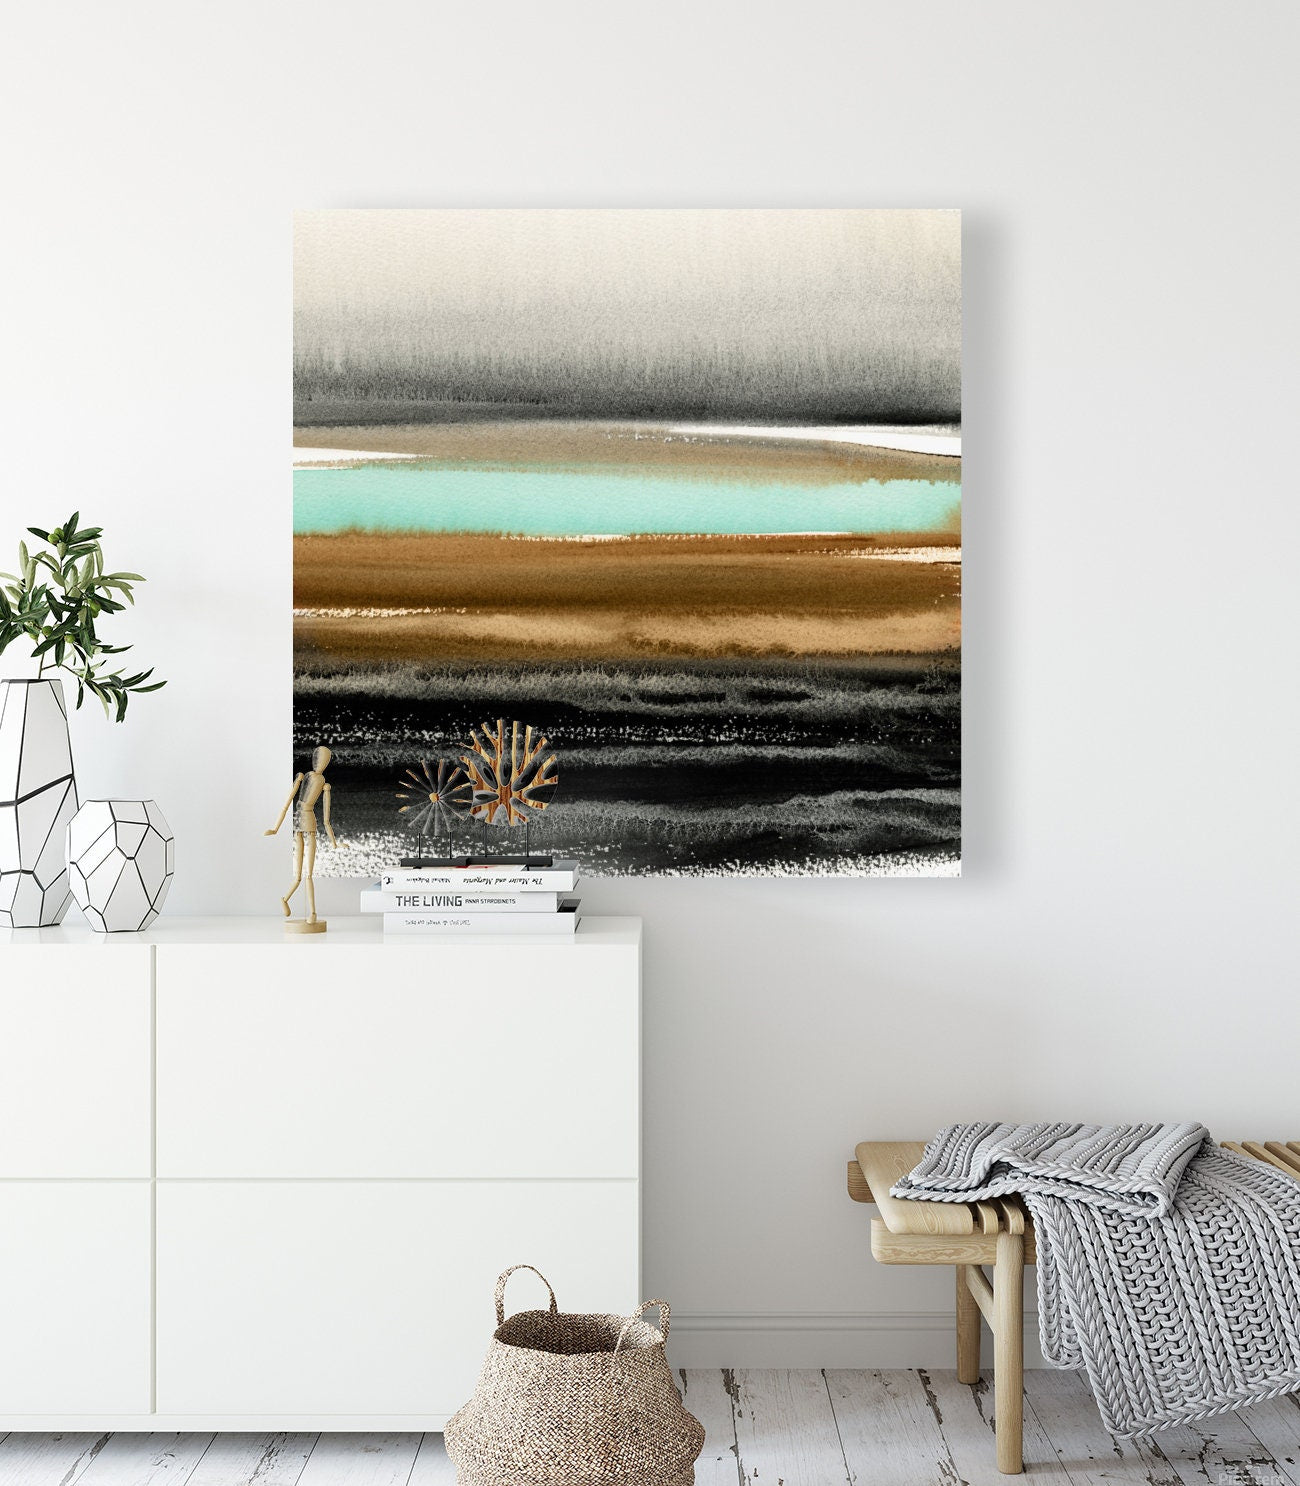 Abstract Square Wall Art, Set Of 2 Prints, Modern Landscape Painting, Print on Canvas, Turquoise, Black, Burnt Orange, Home & Office Decor